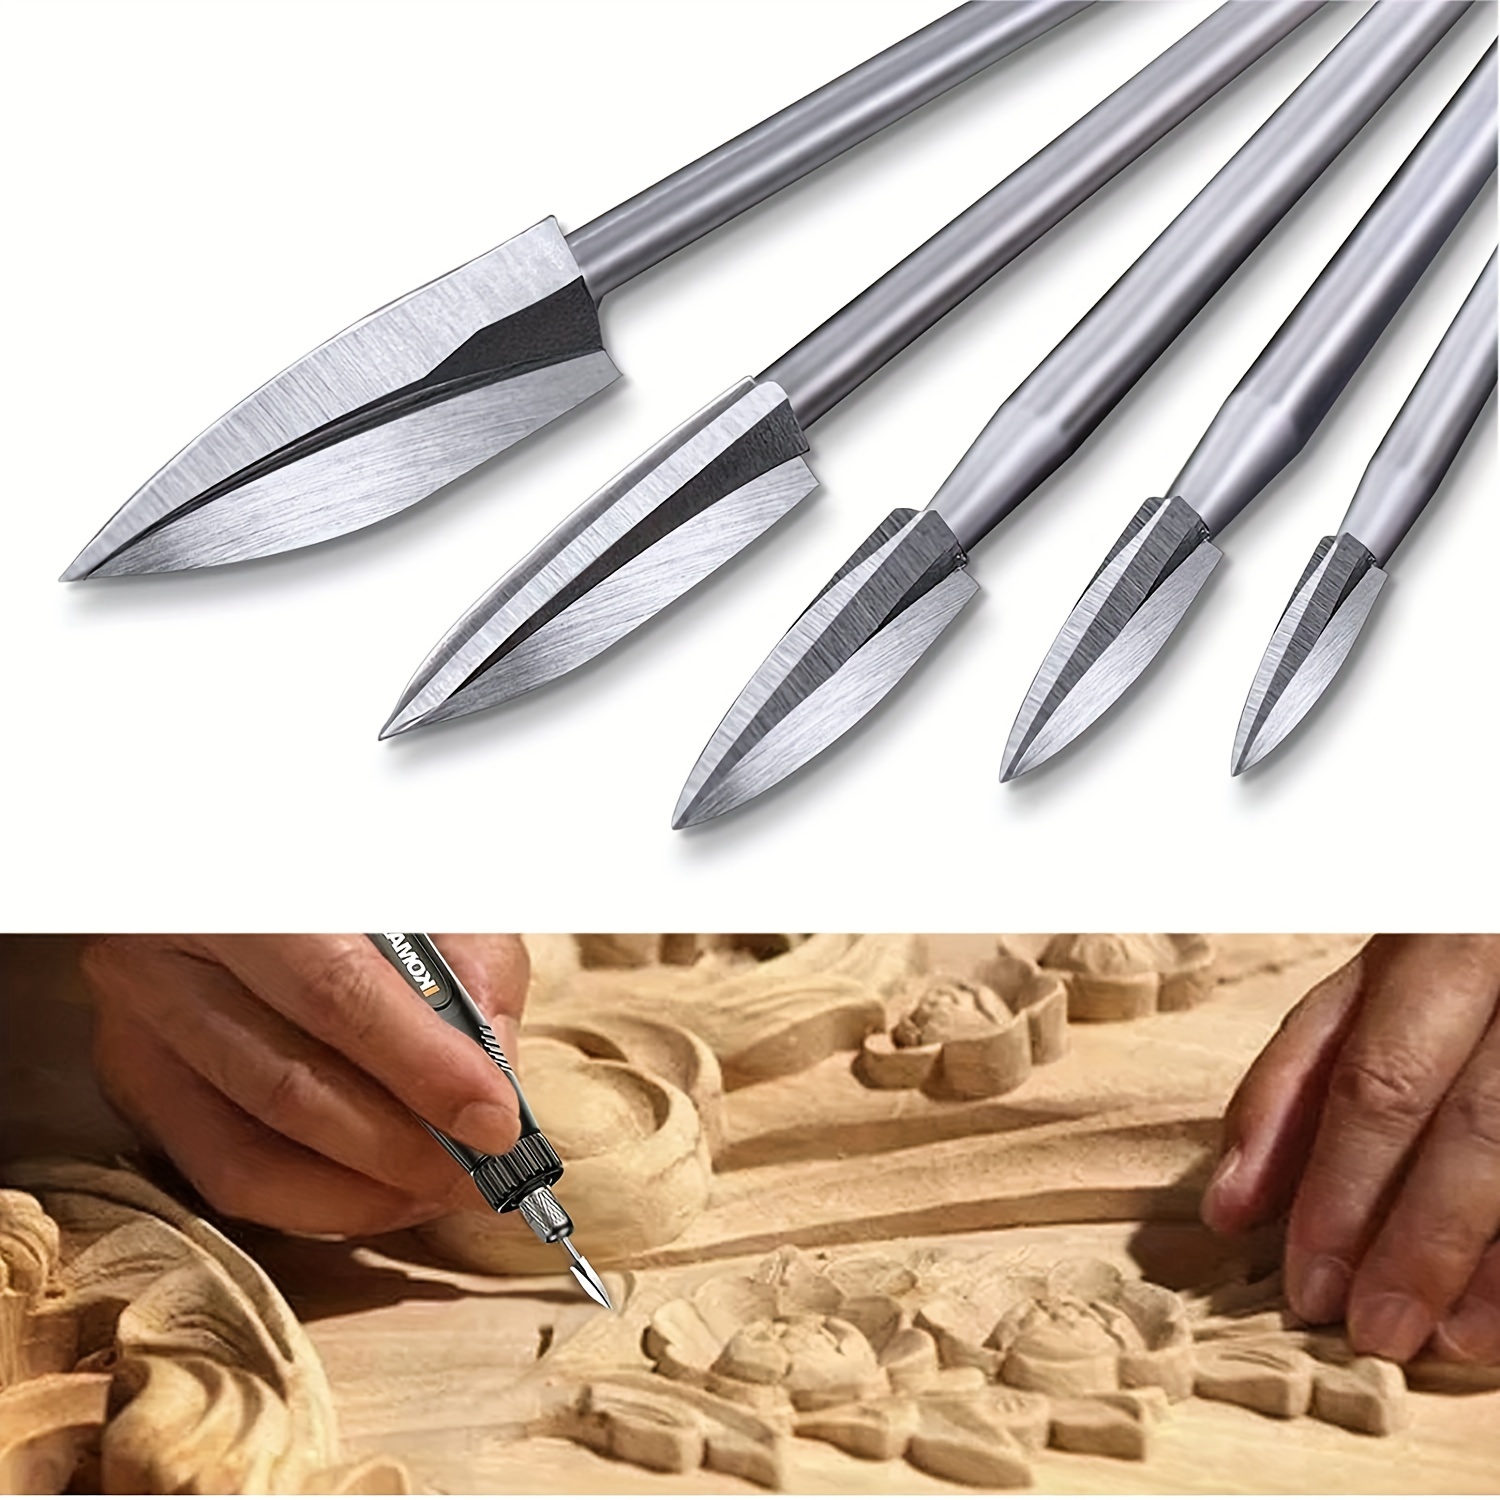  2 Set Linoleum Cutter Carving Engraving Knife Woodworking  Sculpting Tool for Rubber Stamp Arts Crafts Sewing Crafting Woodcrafts Wood Carving  Tools : Arts, Crafts & Sewing